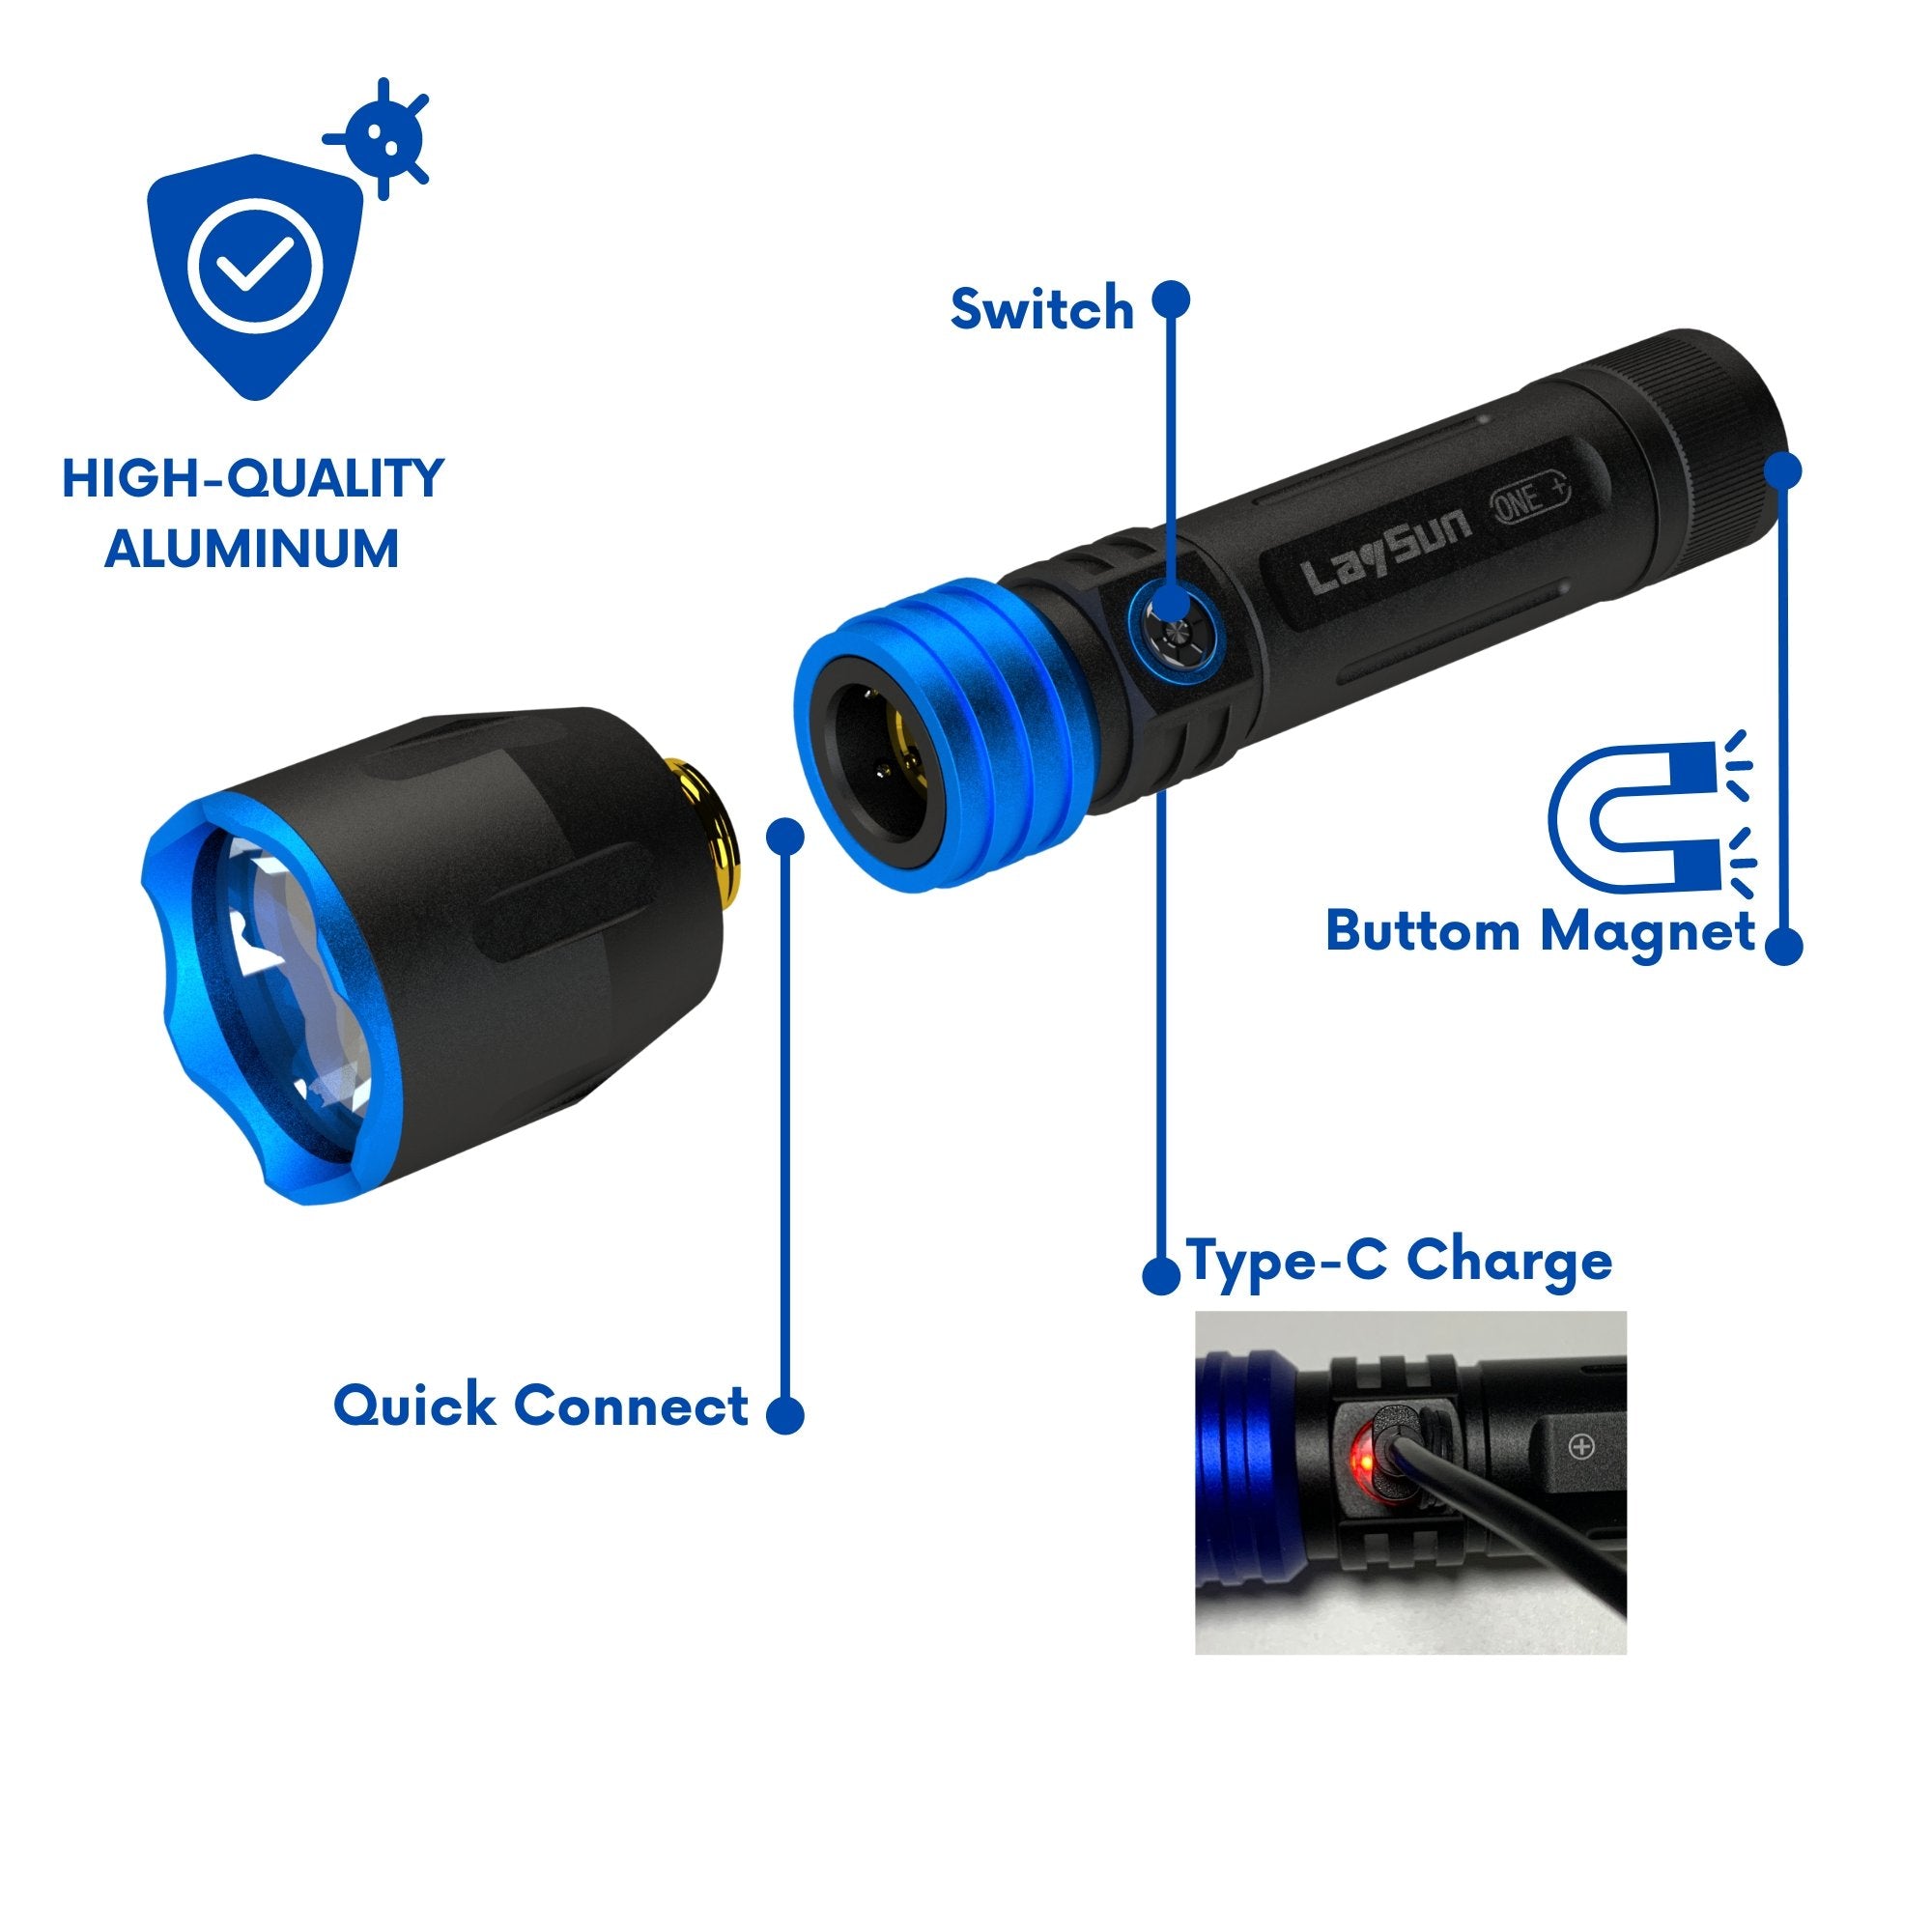 LaySun 3 in 1 Quick Connect Rechargeable Led Work Light Flashlight Flexible Light kit - LaySun Smart